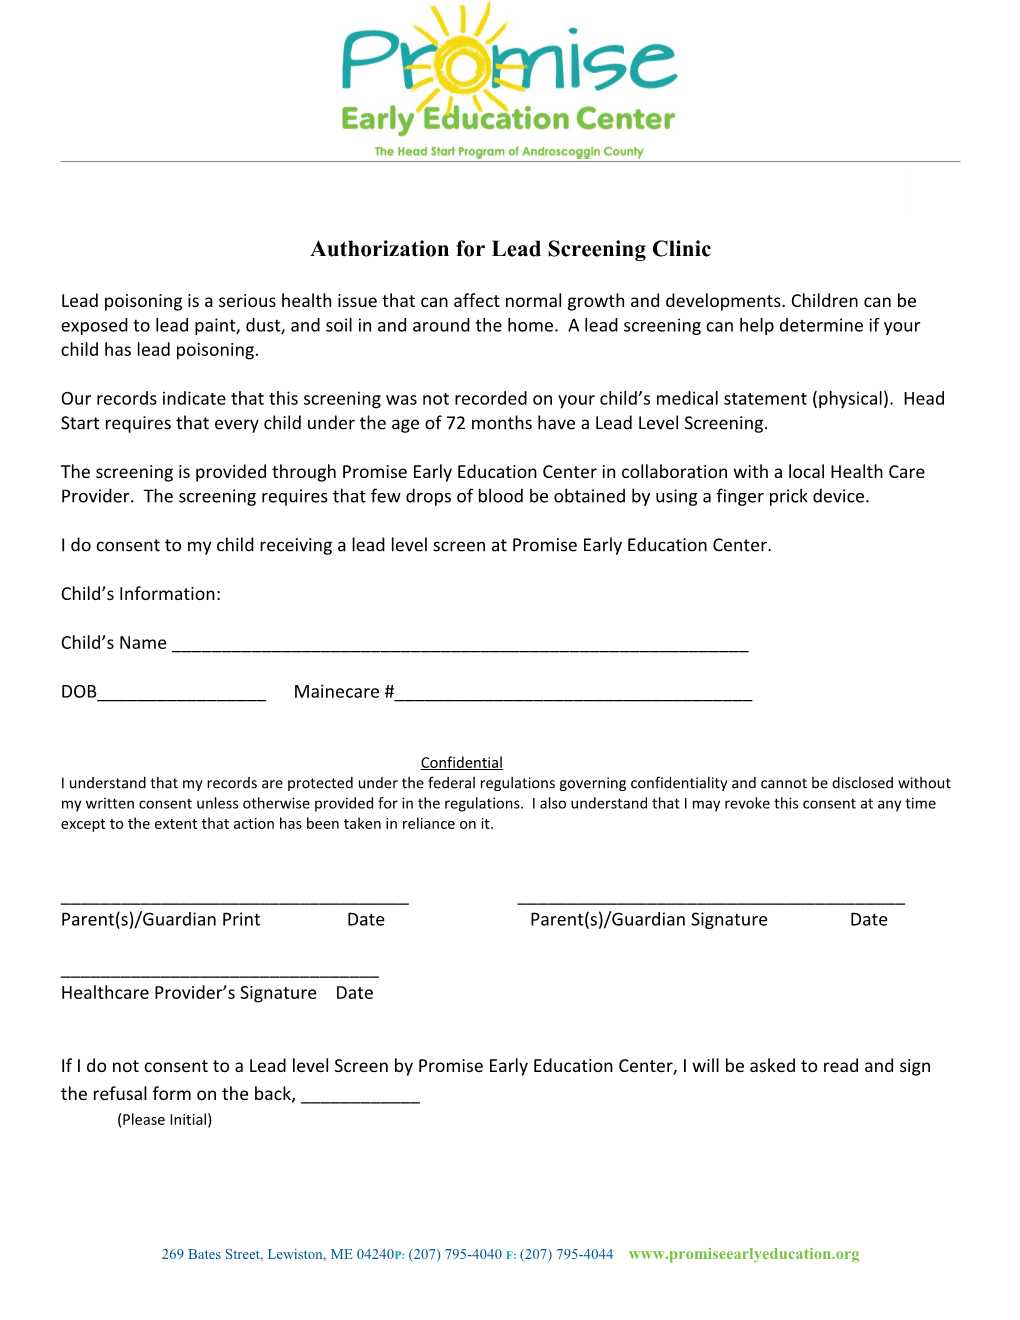 Authorization for Lead Screening Clinic